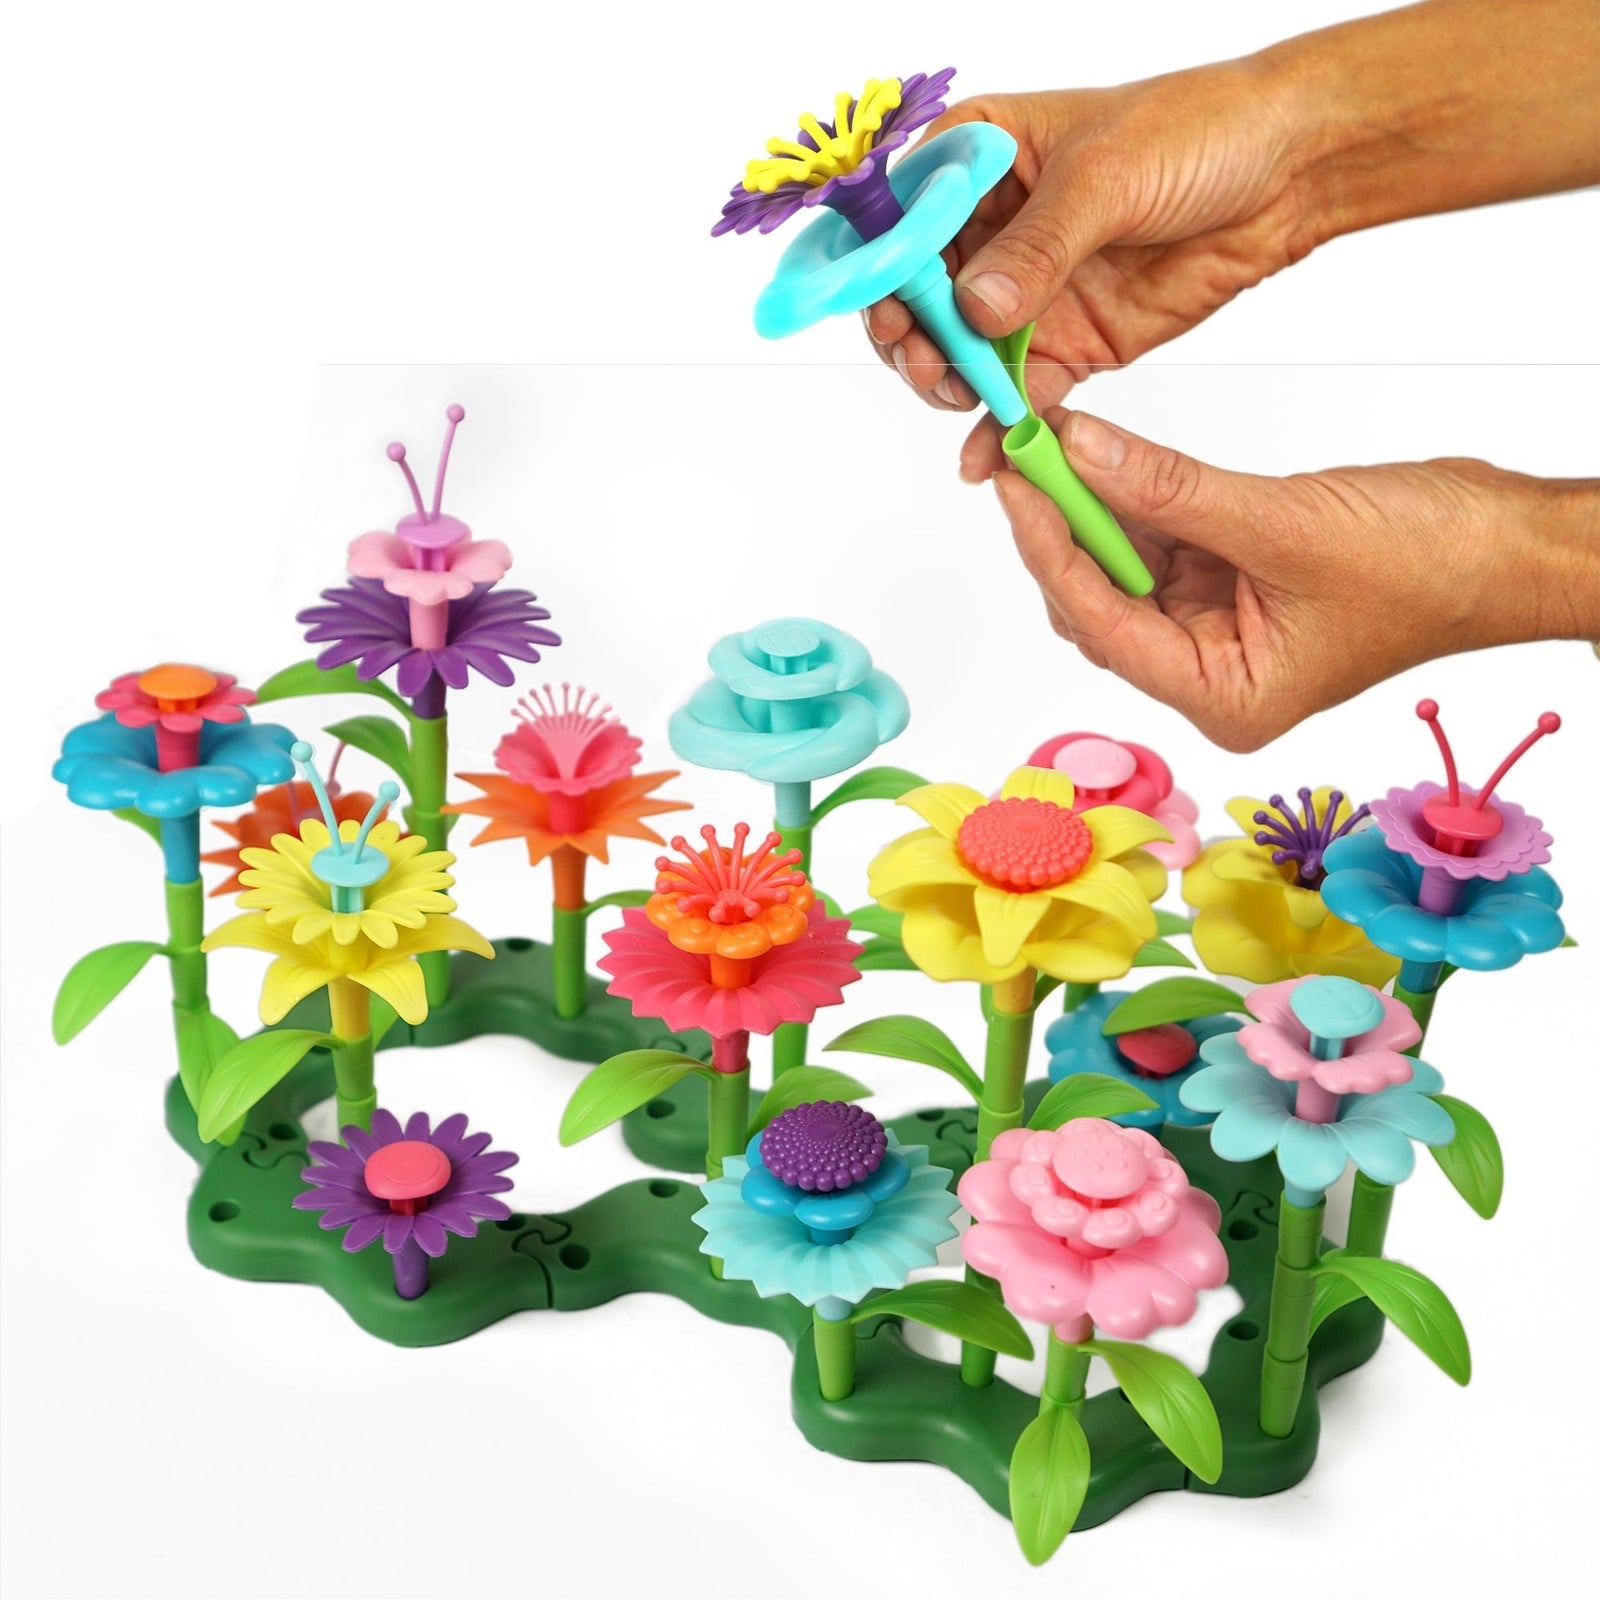 Build A Flower Garden, Colorful Flower Stacking Toy 47 Pcs - Axel Adventures